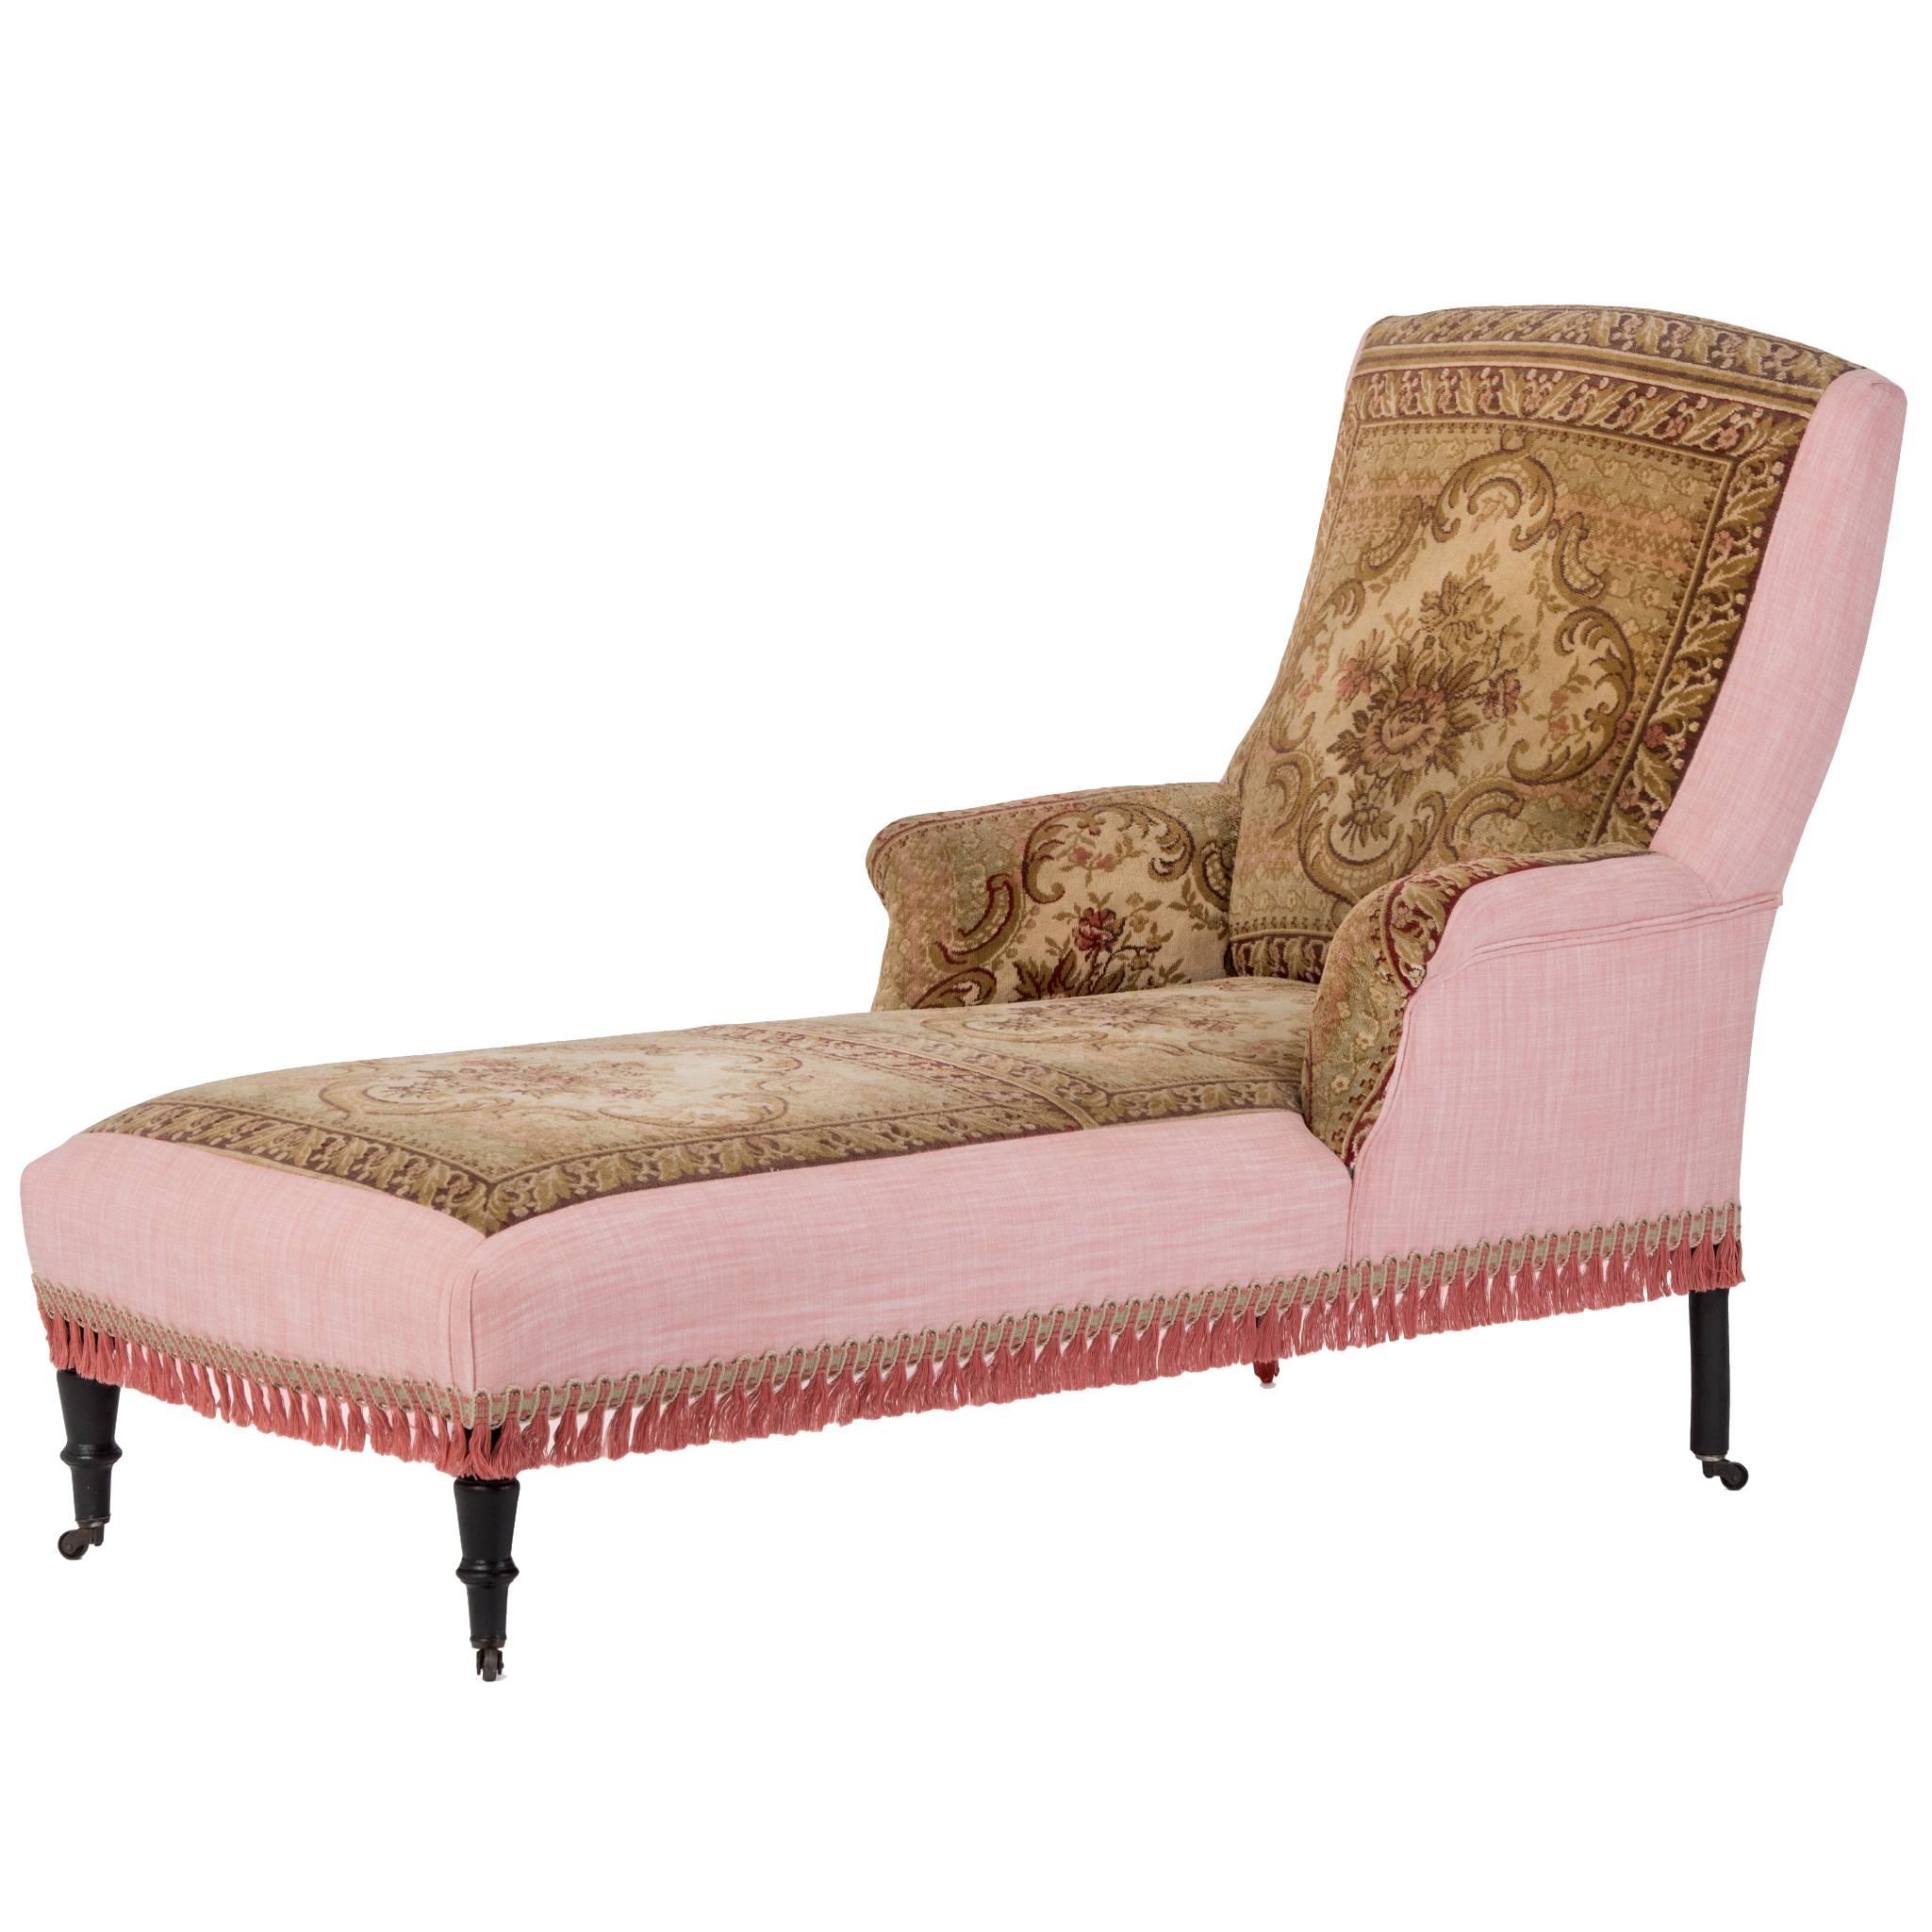 Unique and unusual late 19th century French tapestry faced chaise longue, sympathetically restored retaining its original fabric.

Resting on original flayed and turned legs with original casters.

Gorgeous piece of furniture, would grace any